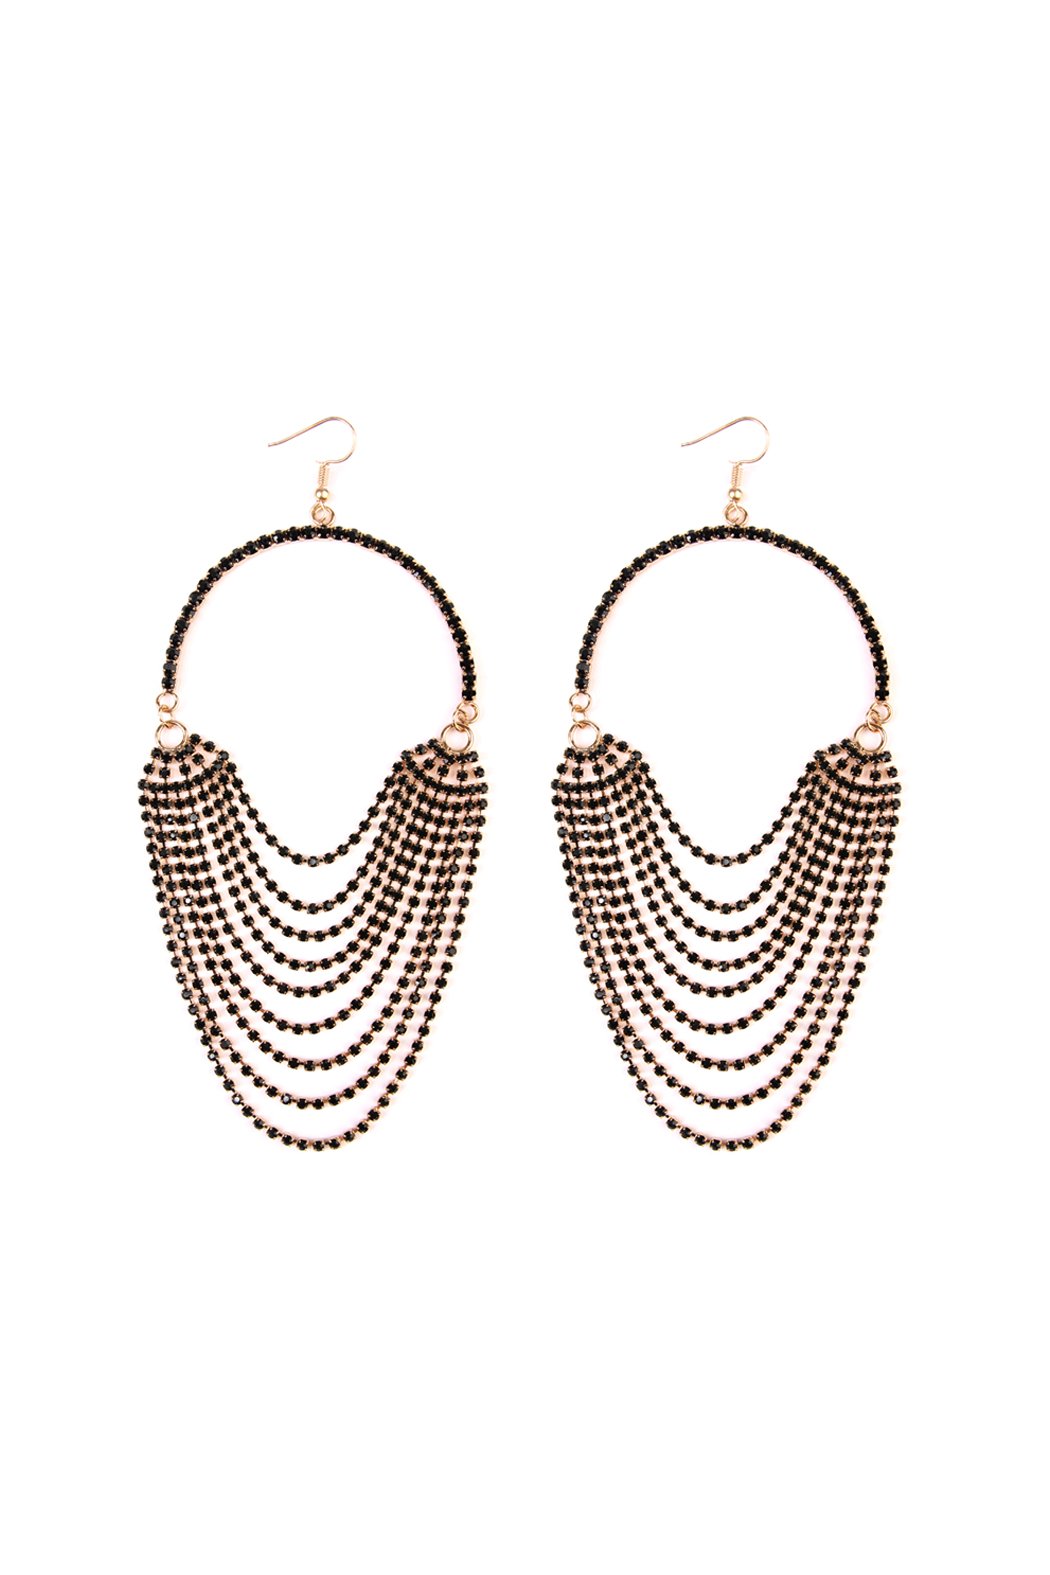 Riah Fashion Black Layer Hook Dangle Earrings - Lily And Ann Online Boutique